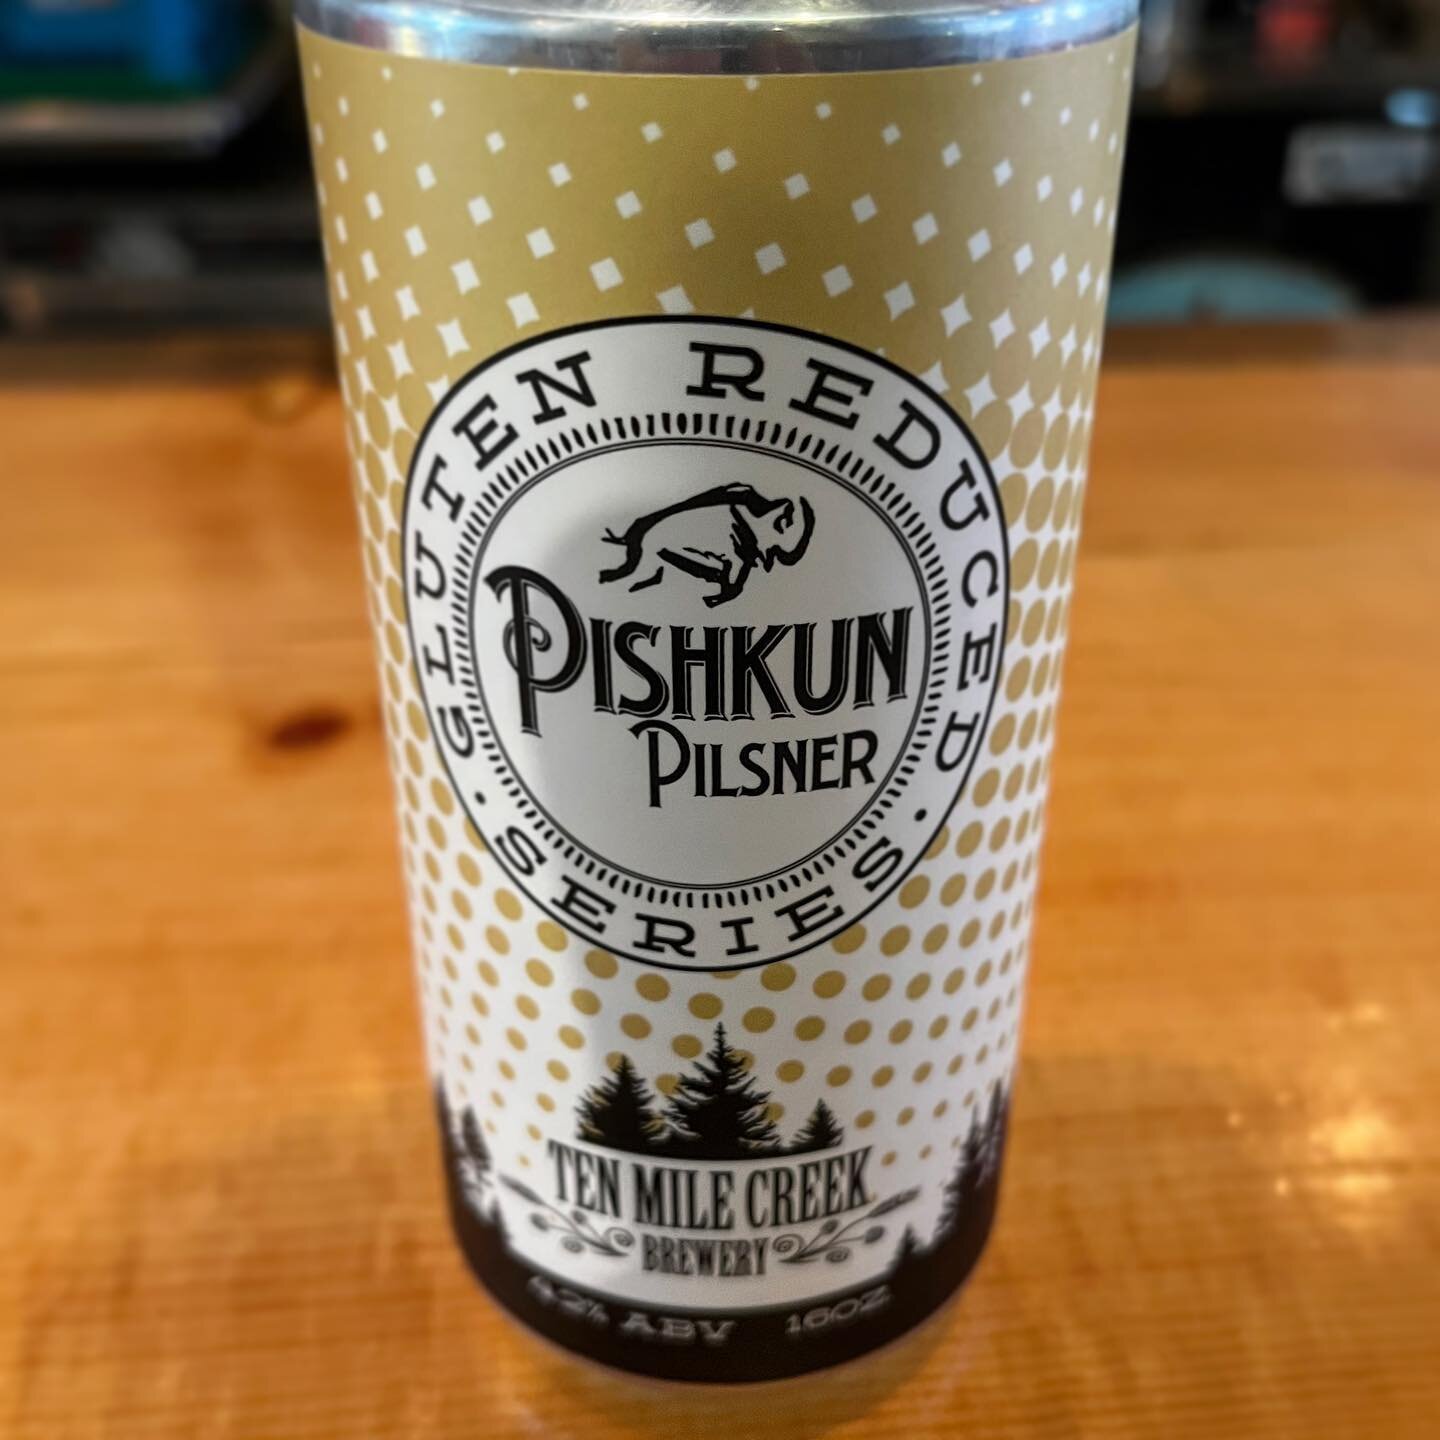 The new Pishkun Pilsner can! Stop in to @tenmilecreekbrewery to pick up some of the Gluten Free Series #beer #brewery #graphicdesign #design #graphicdesigner #designer #illustration #candesign #packagingdesign #helenamt #montana #montanaartist #veter